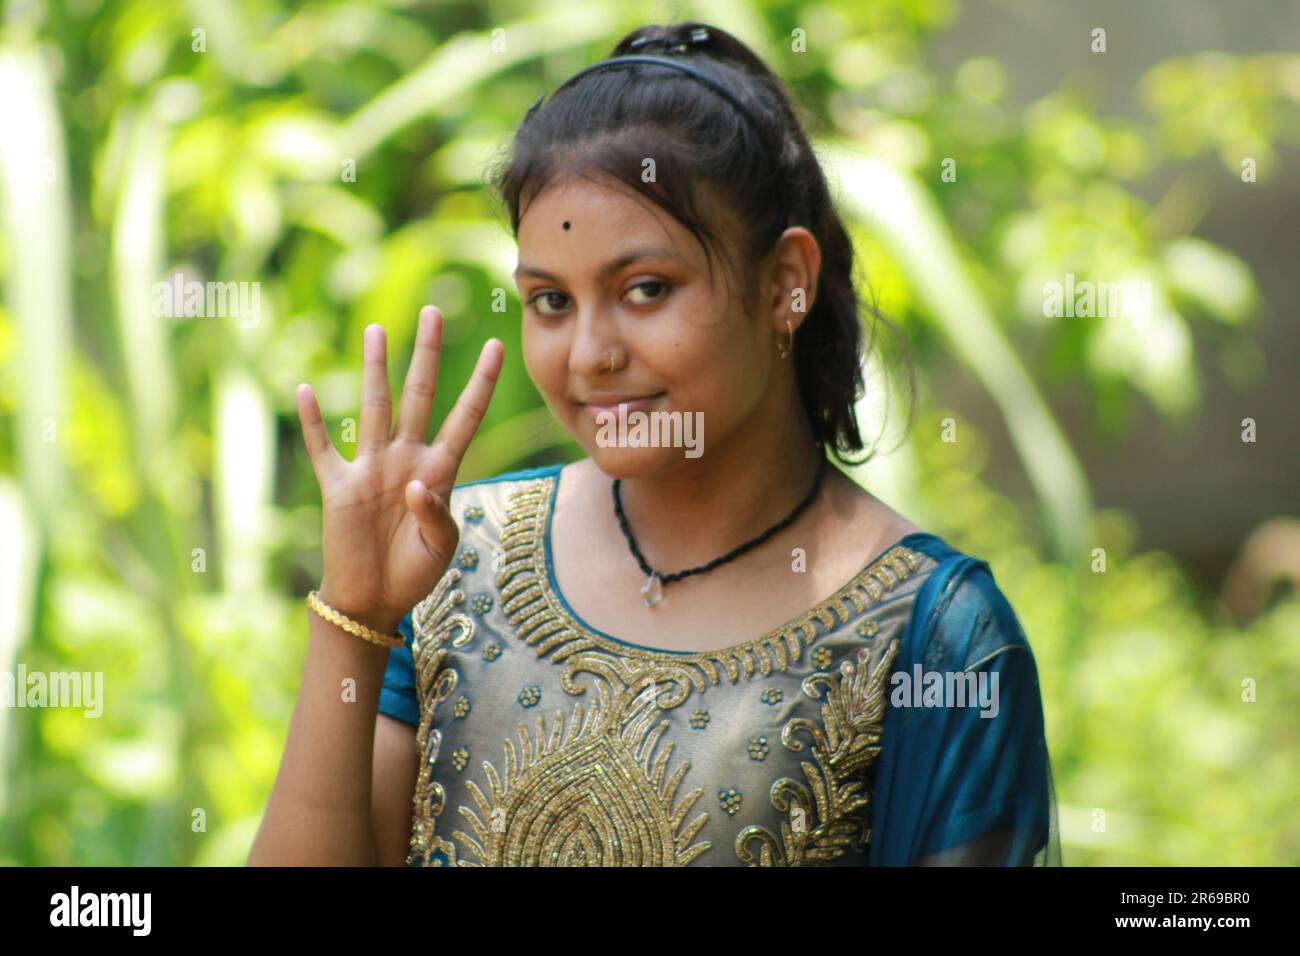 Indian Teenage Girl Showing And Pointing With Finger Number Four While Smiling Confident And